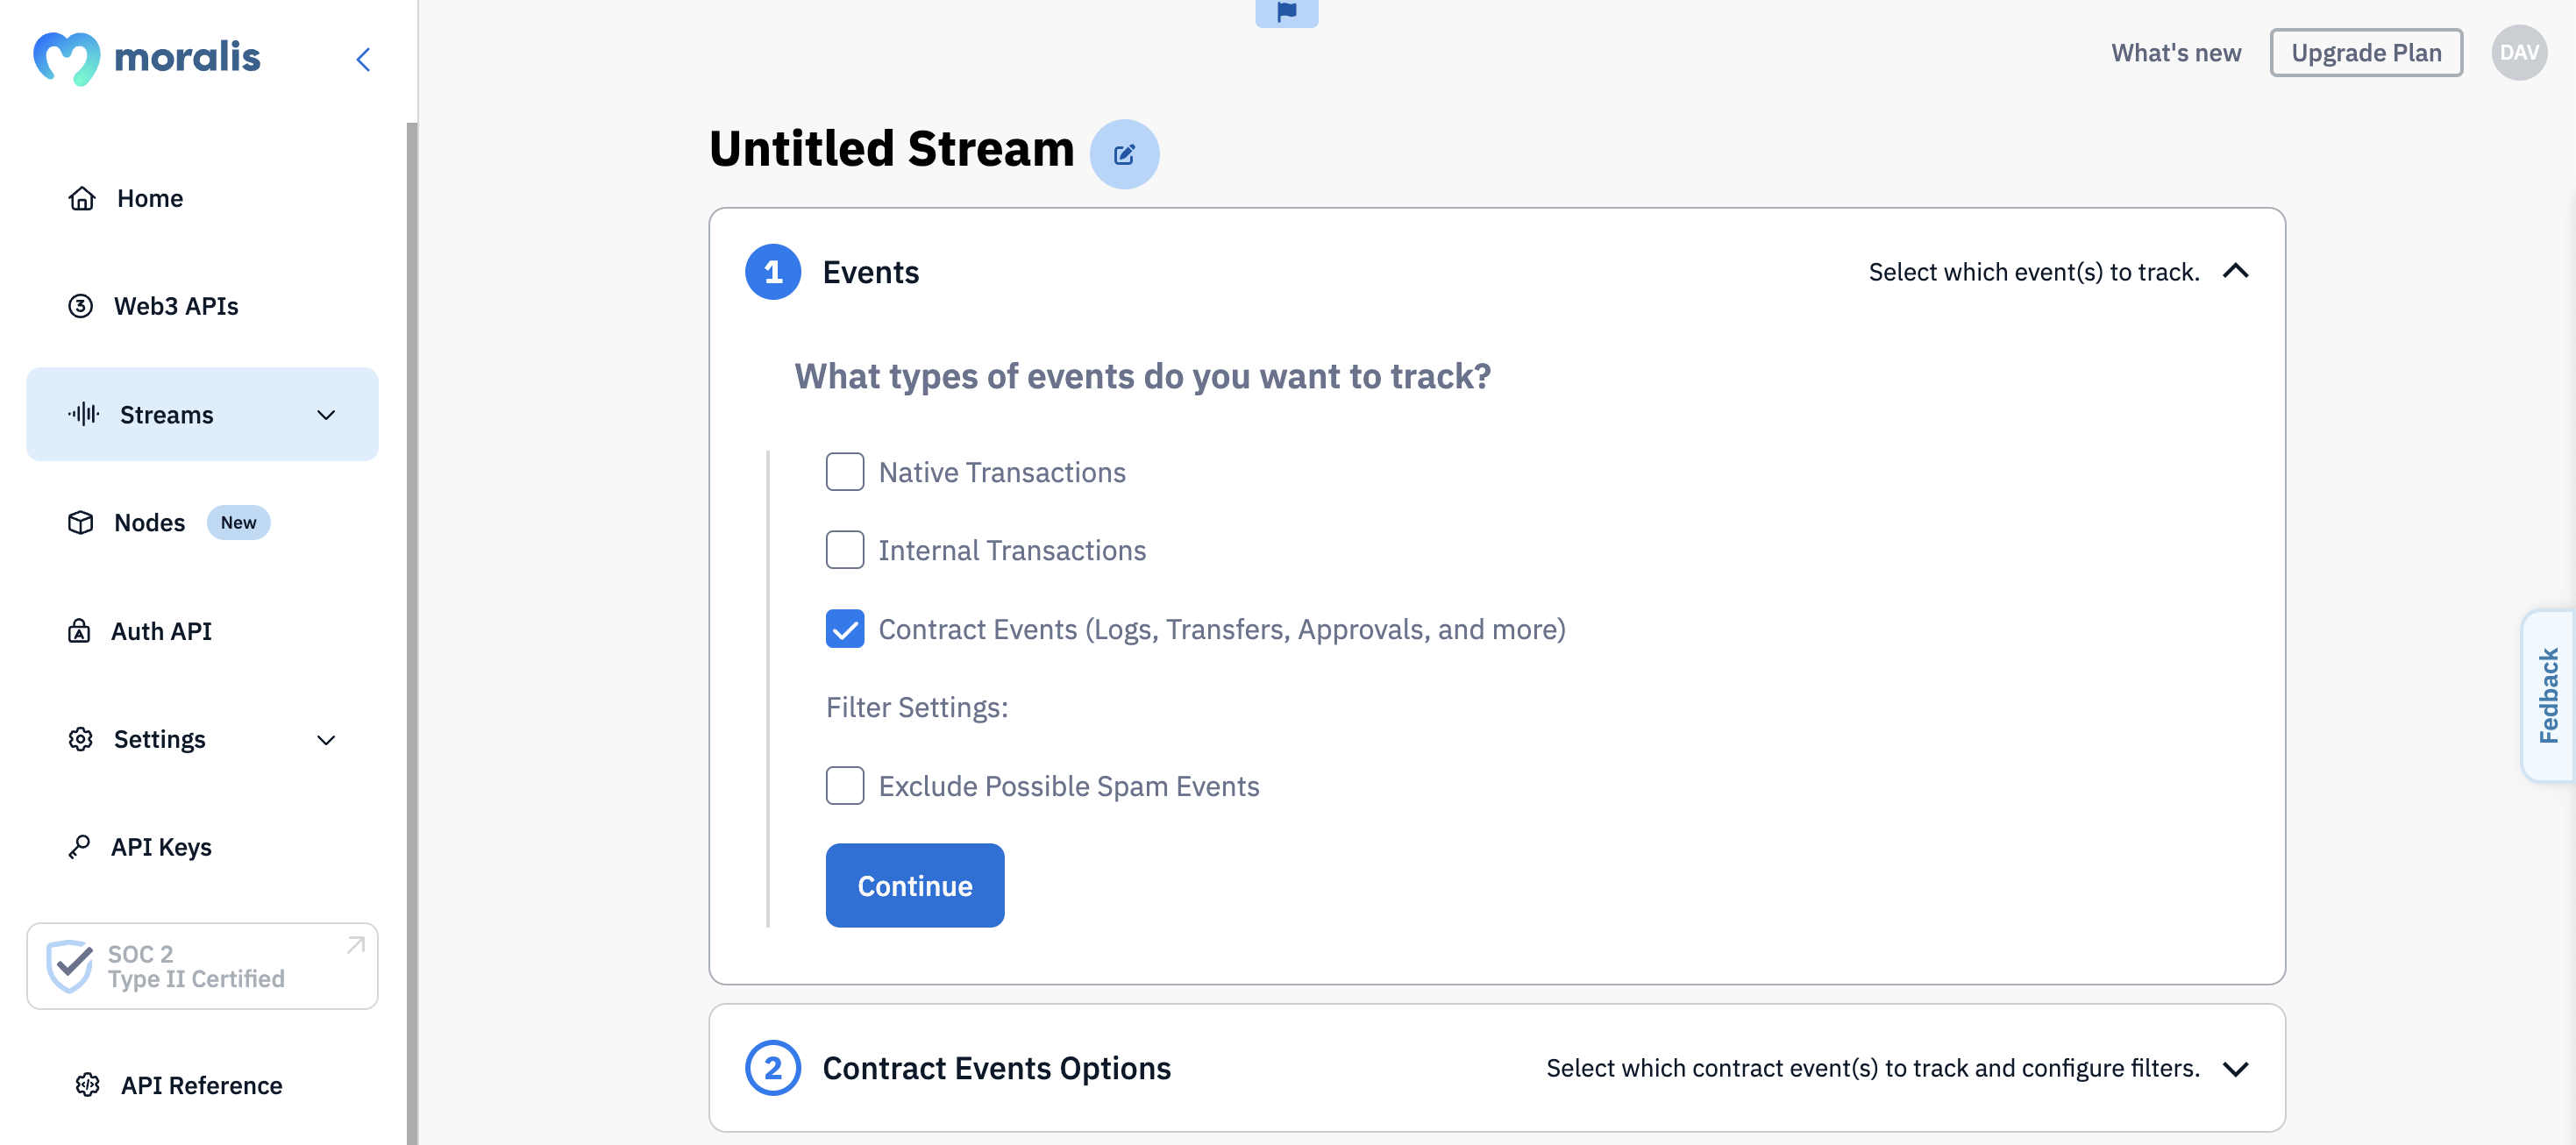 "Contract Events" checked when creating a stream using the Streams API.